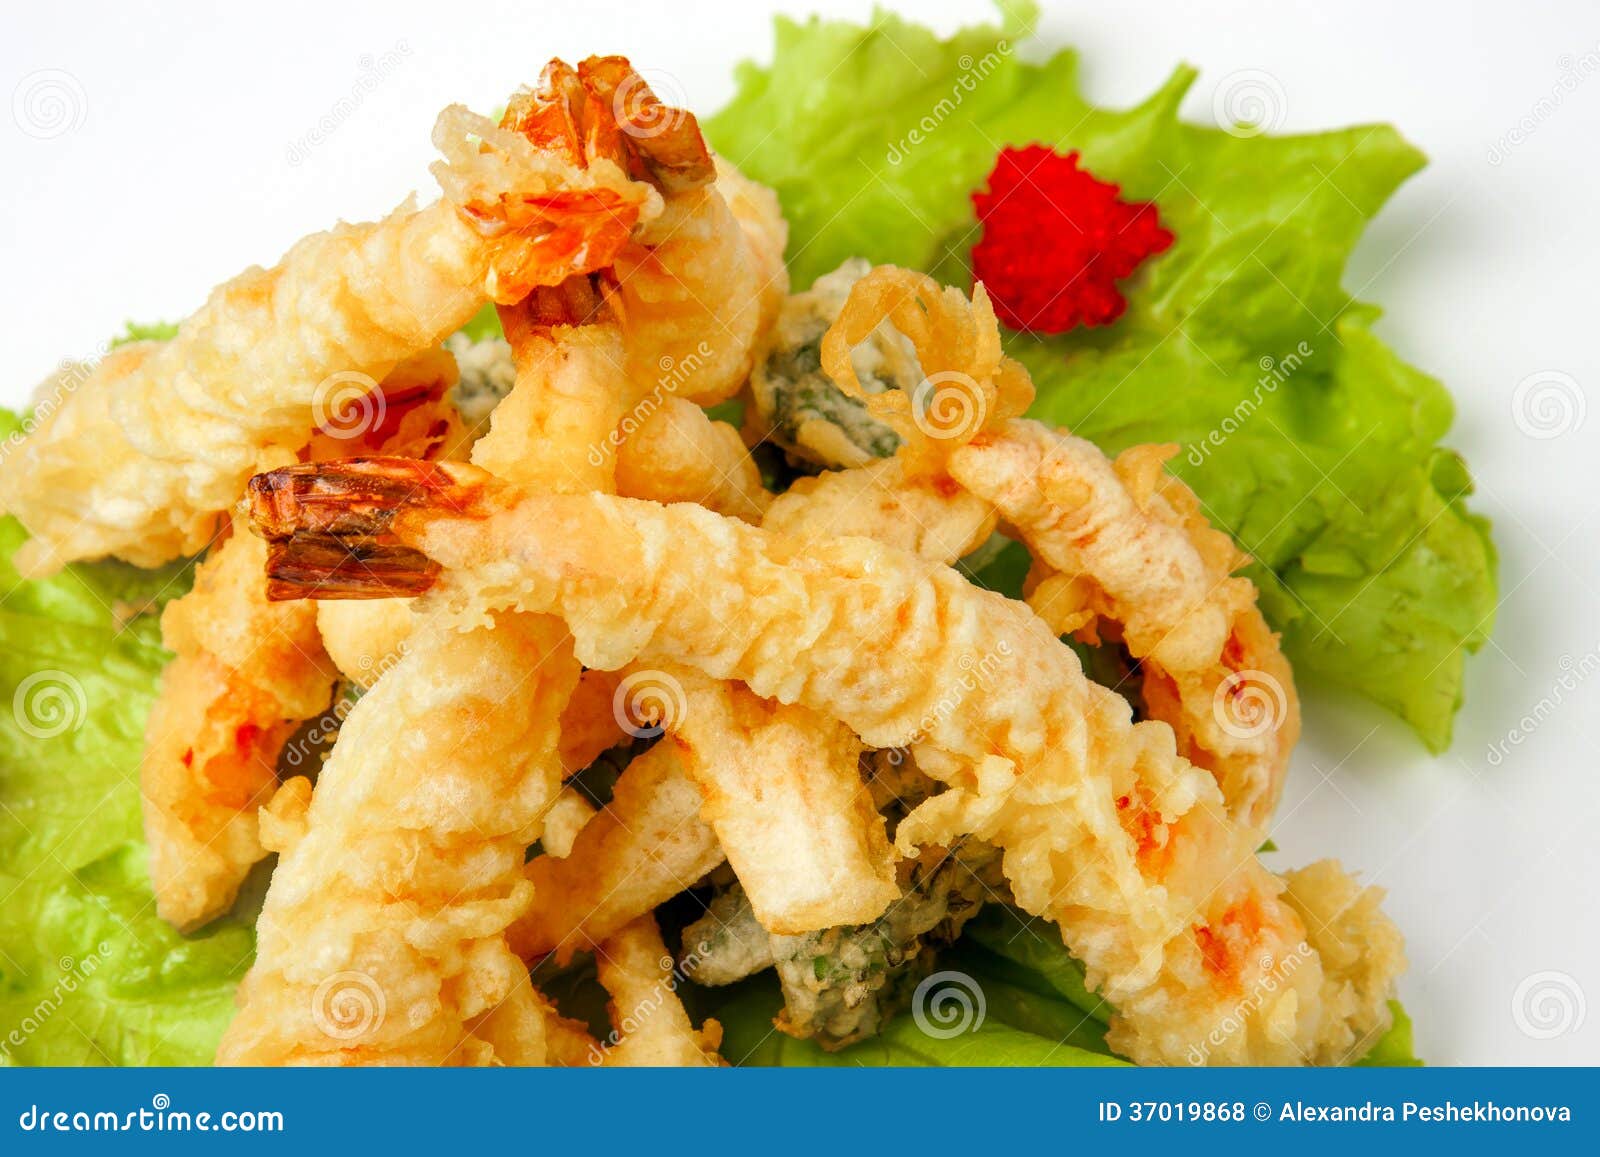 Tiger Prawns in Tempura with Lettuce Leaves Stock Photo - Image of ...